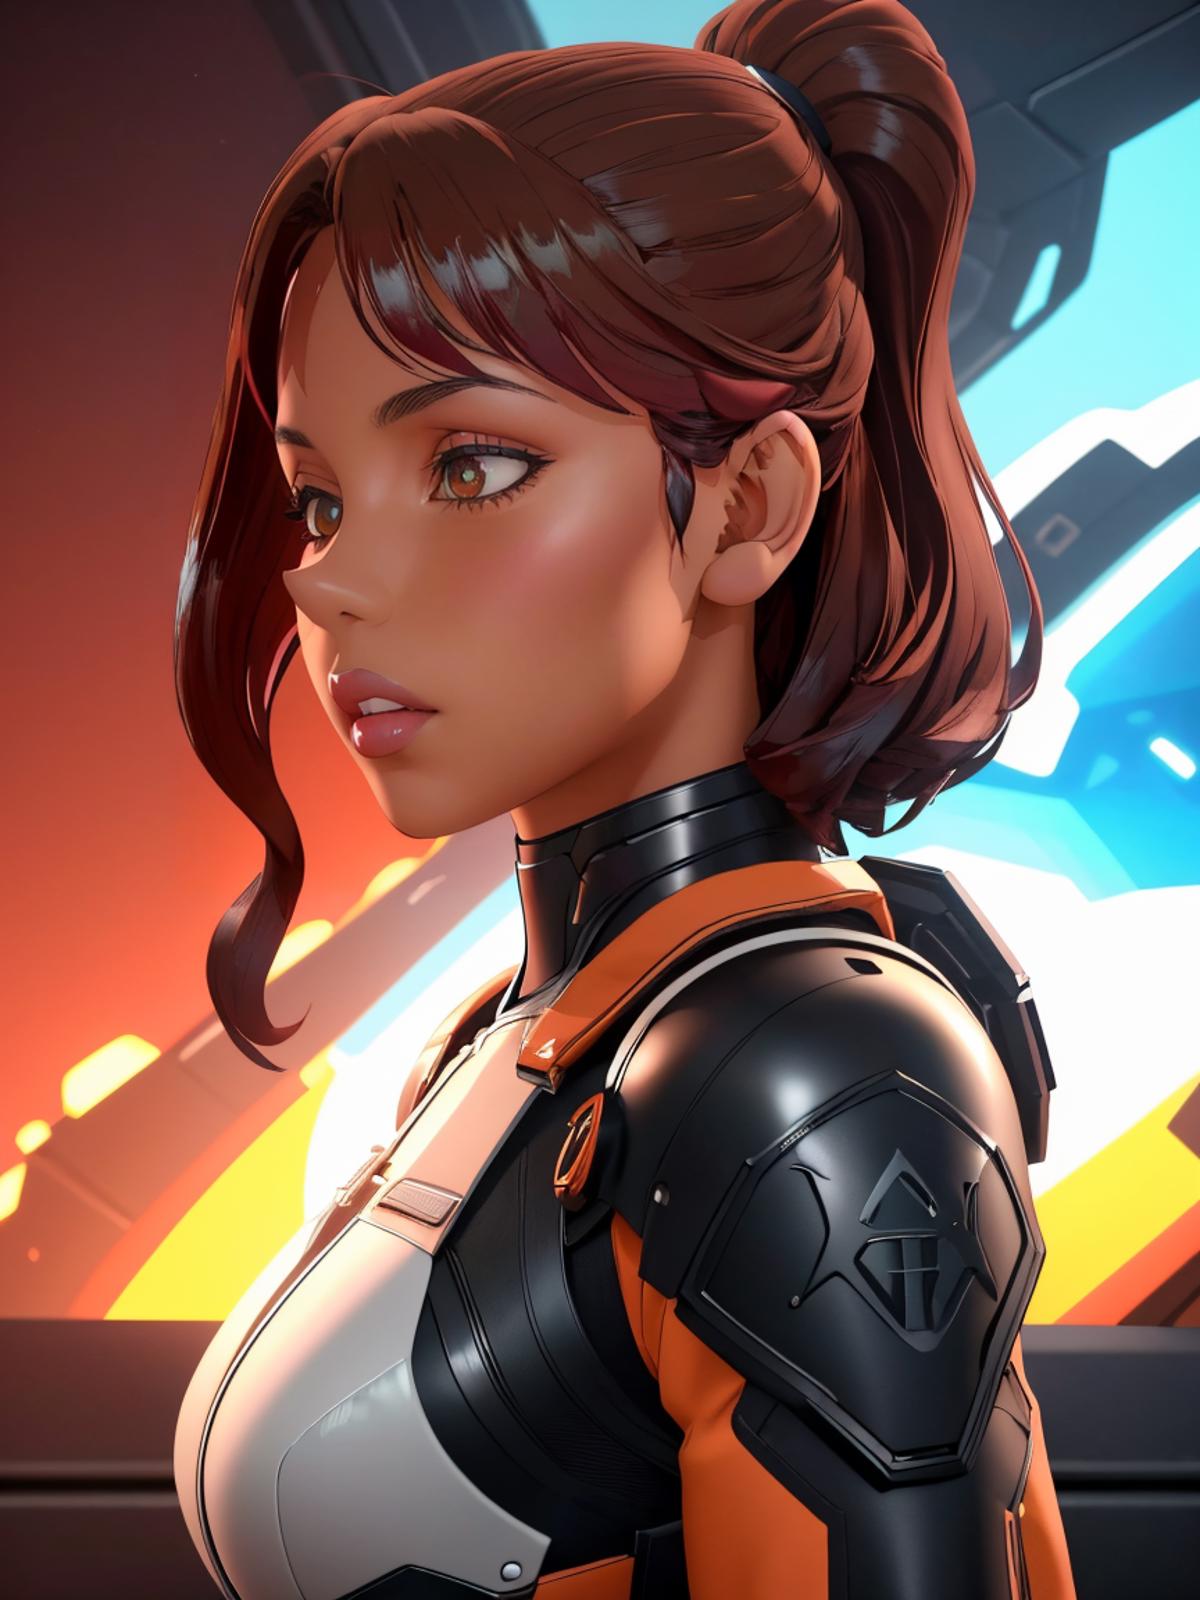 A 3D animated female character wearing a black and orange armor.